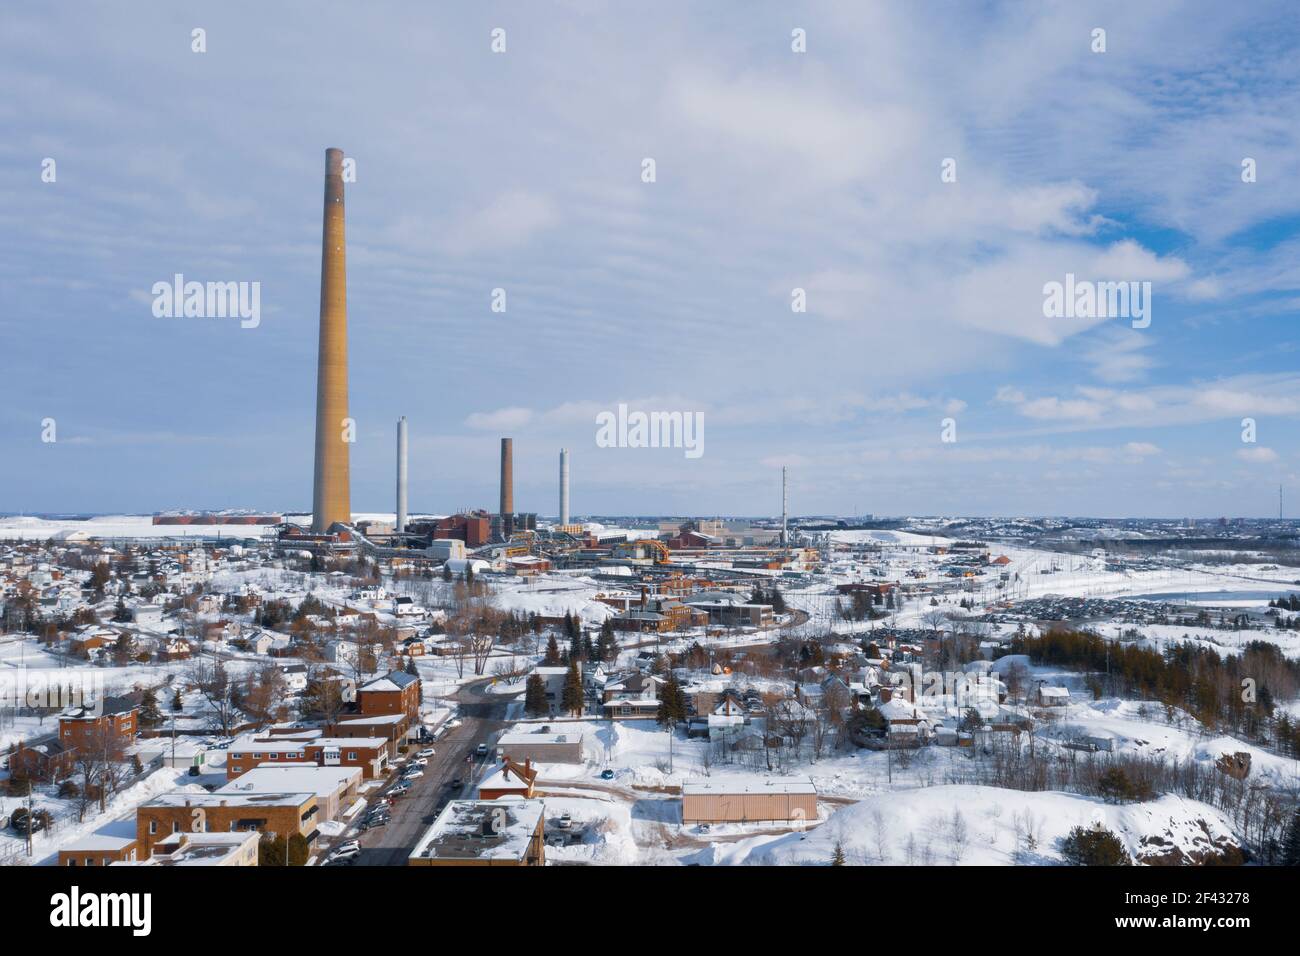 Smoke Stack Rises 1000 Ft. Over Wintery Town Stock Photo